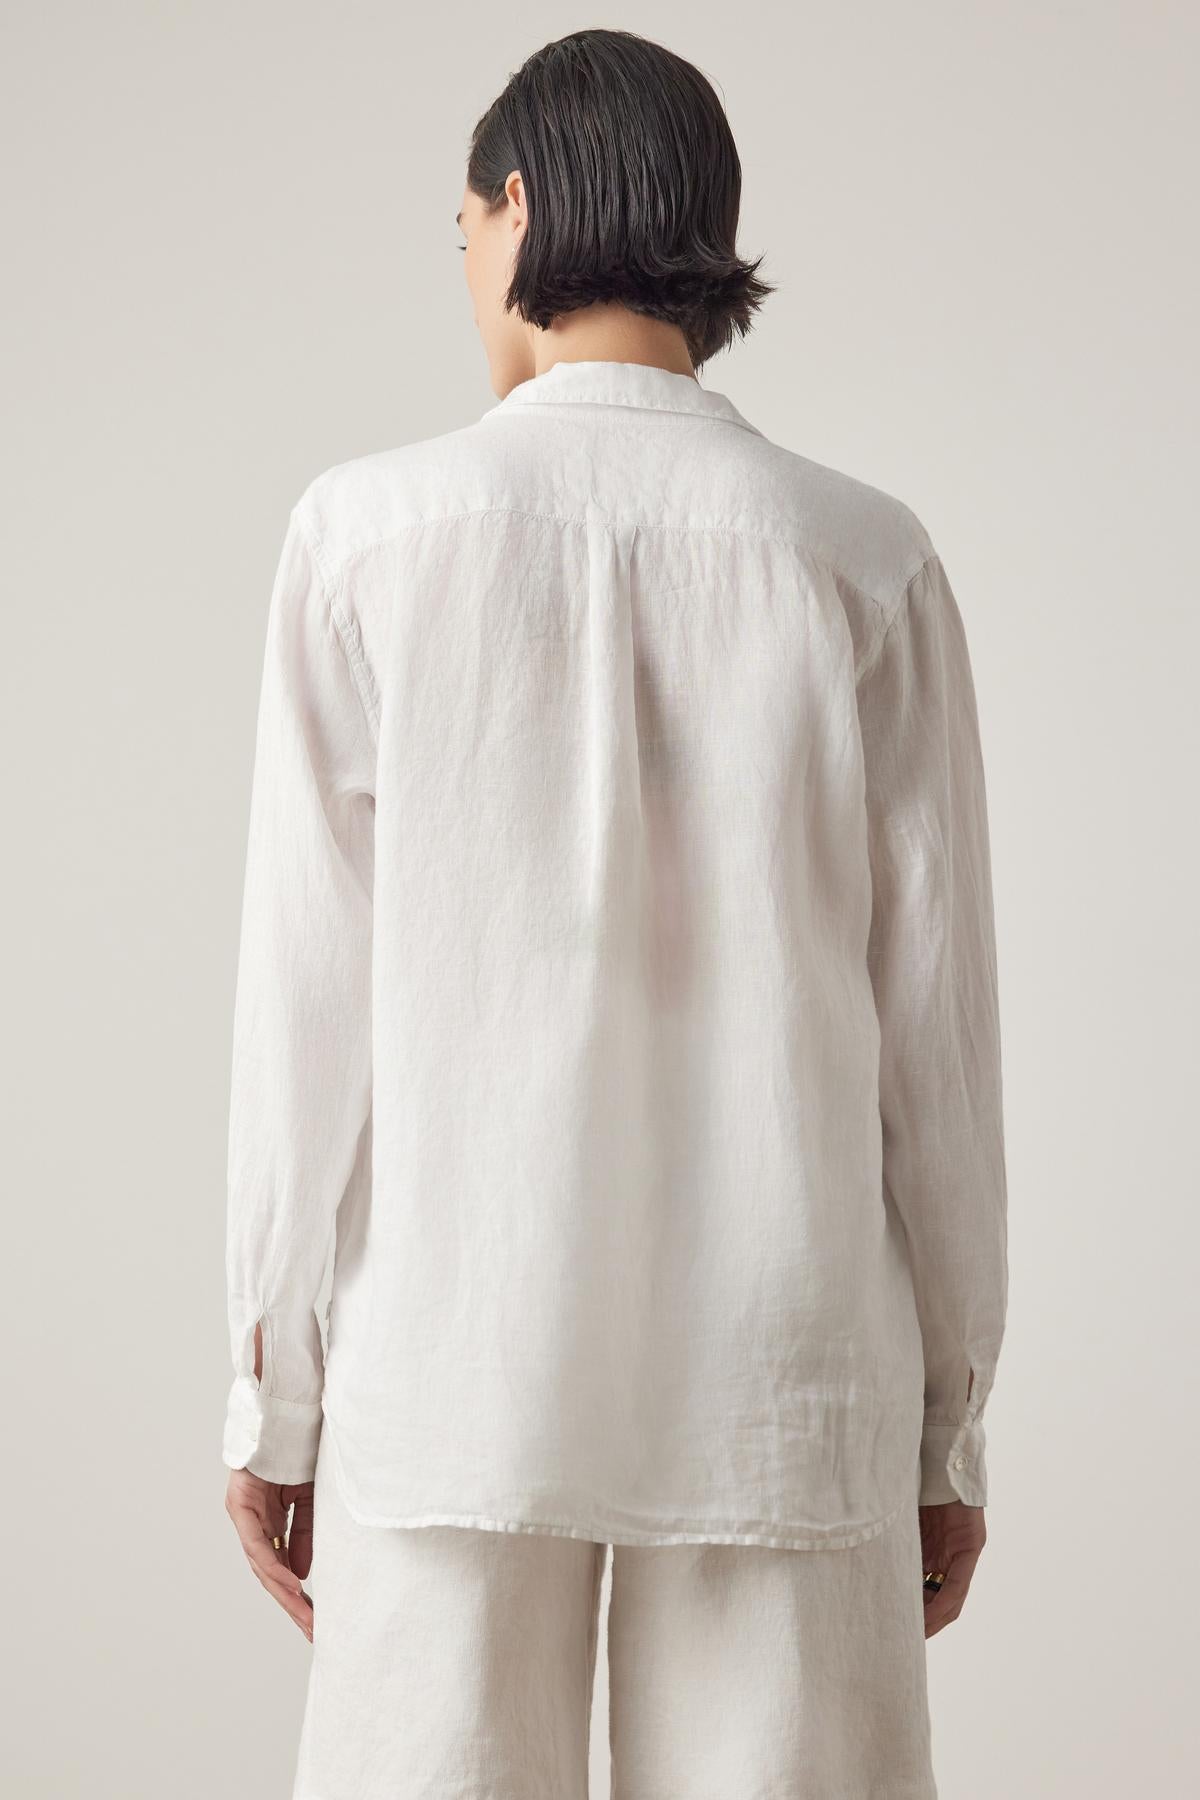 A person with short dark hair, seen from behind, wearing a long-sleeve white MULHOLLAND LINEN SHIRT by Velvet by Jenny Graham with a scooped hemline and white pants, against a plain background.-37018505183425